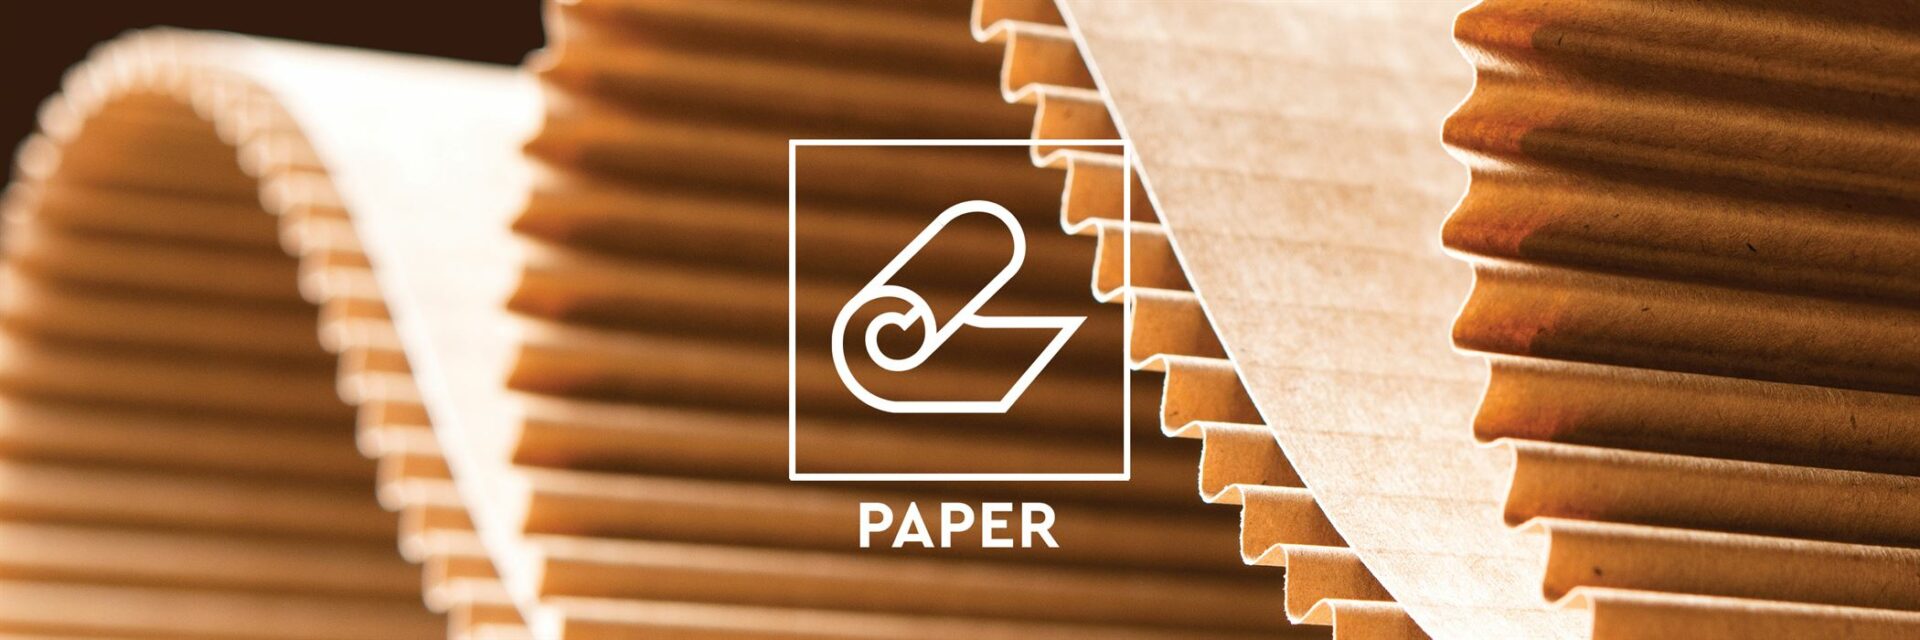 Paper | OL-A Products